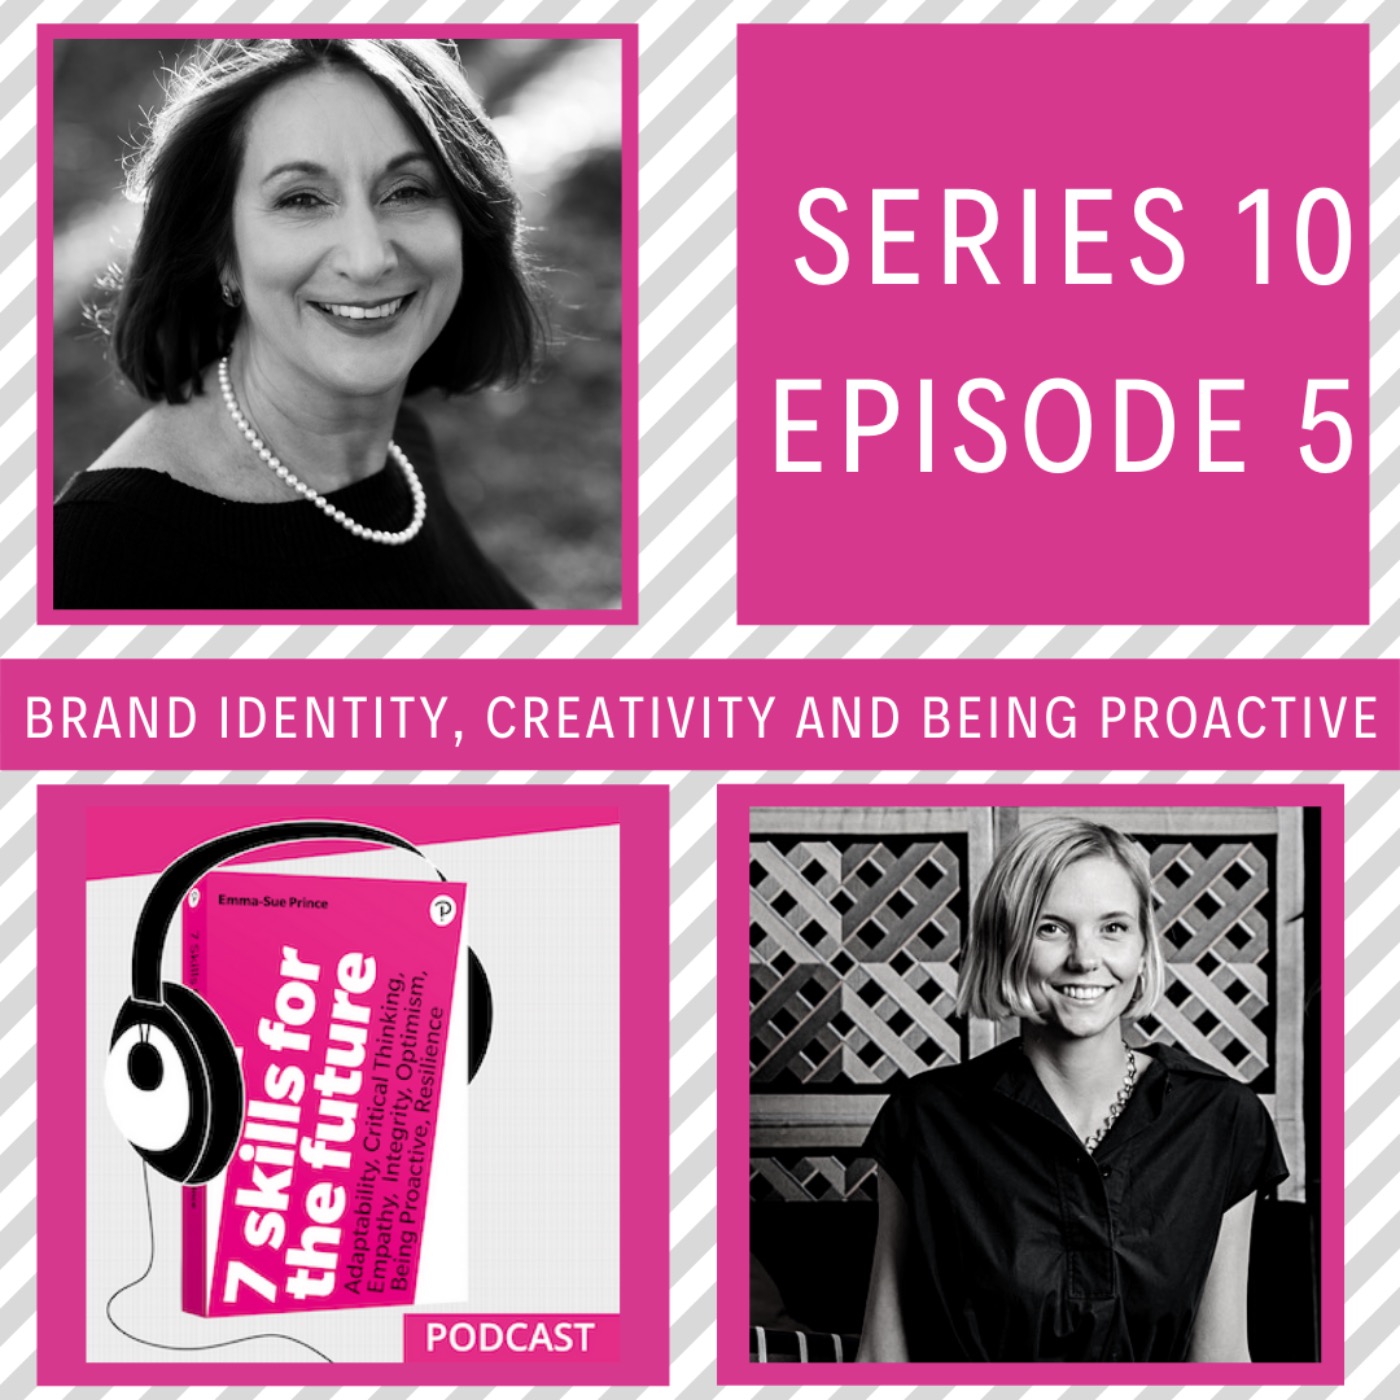 Brand Identity, Creativity and Being Proactive